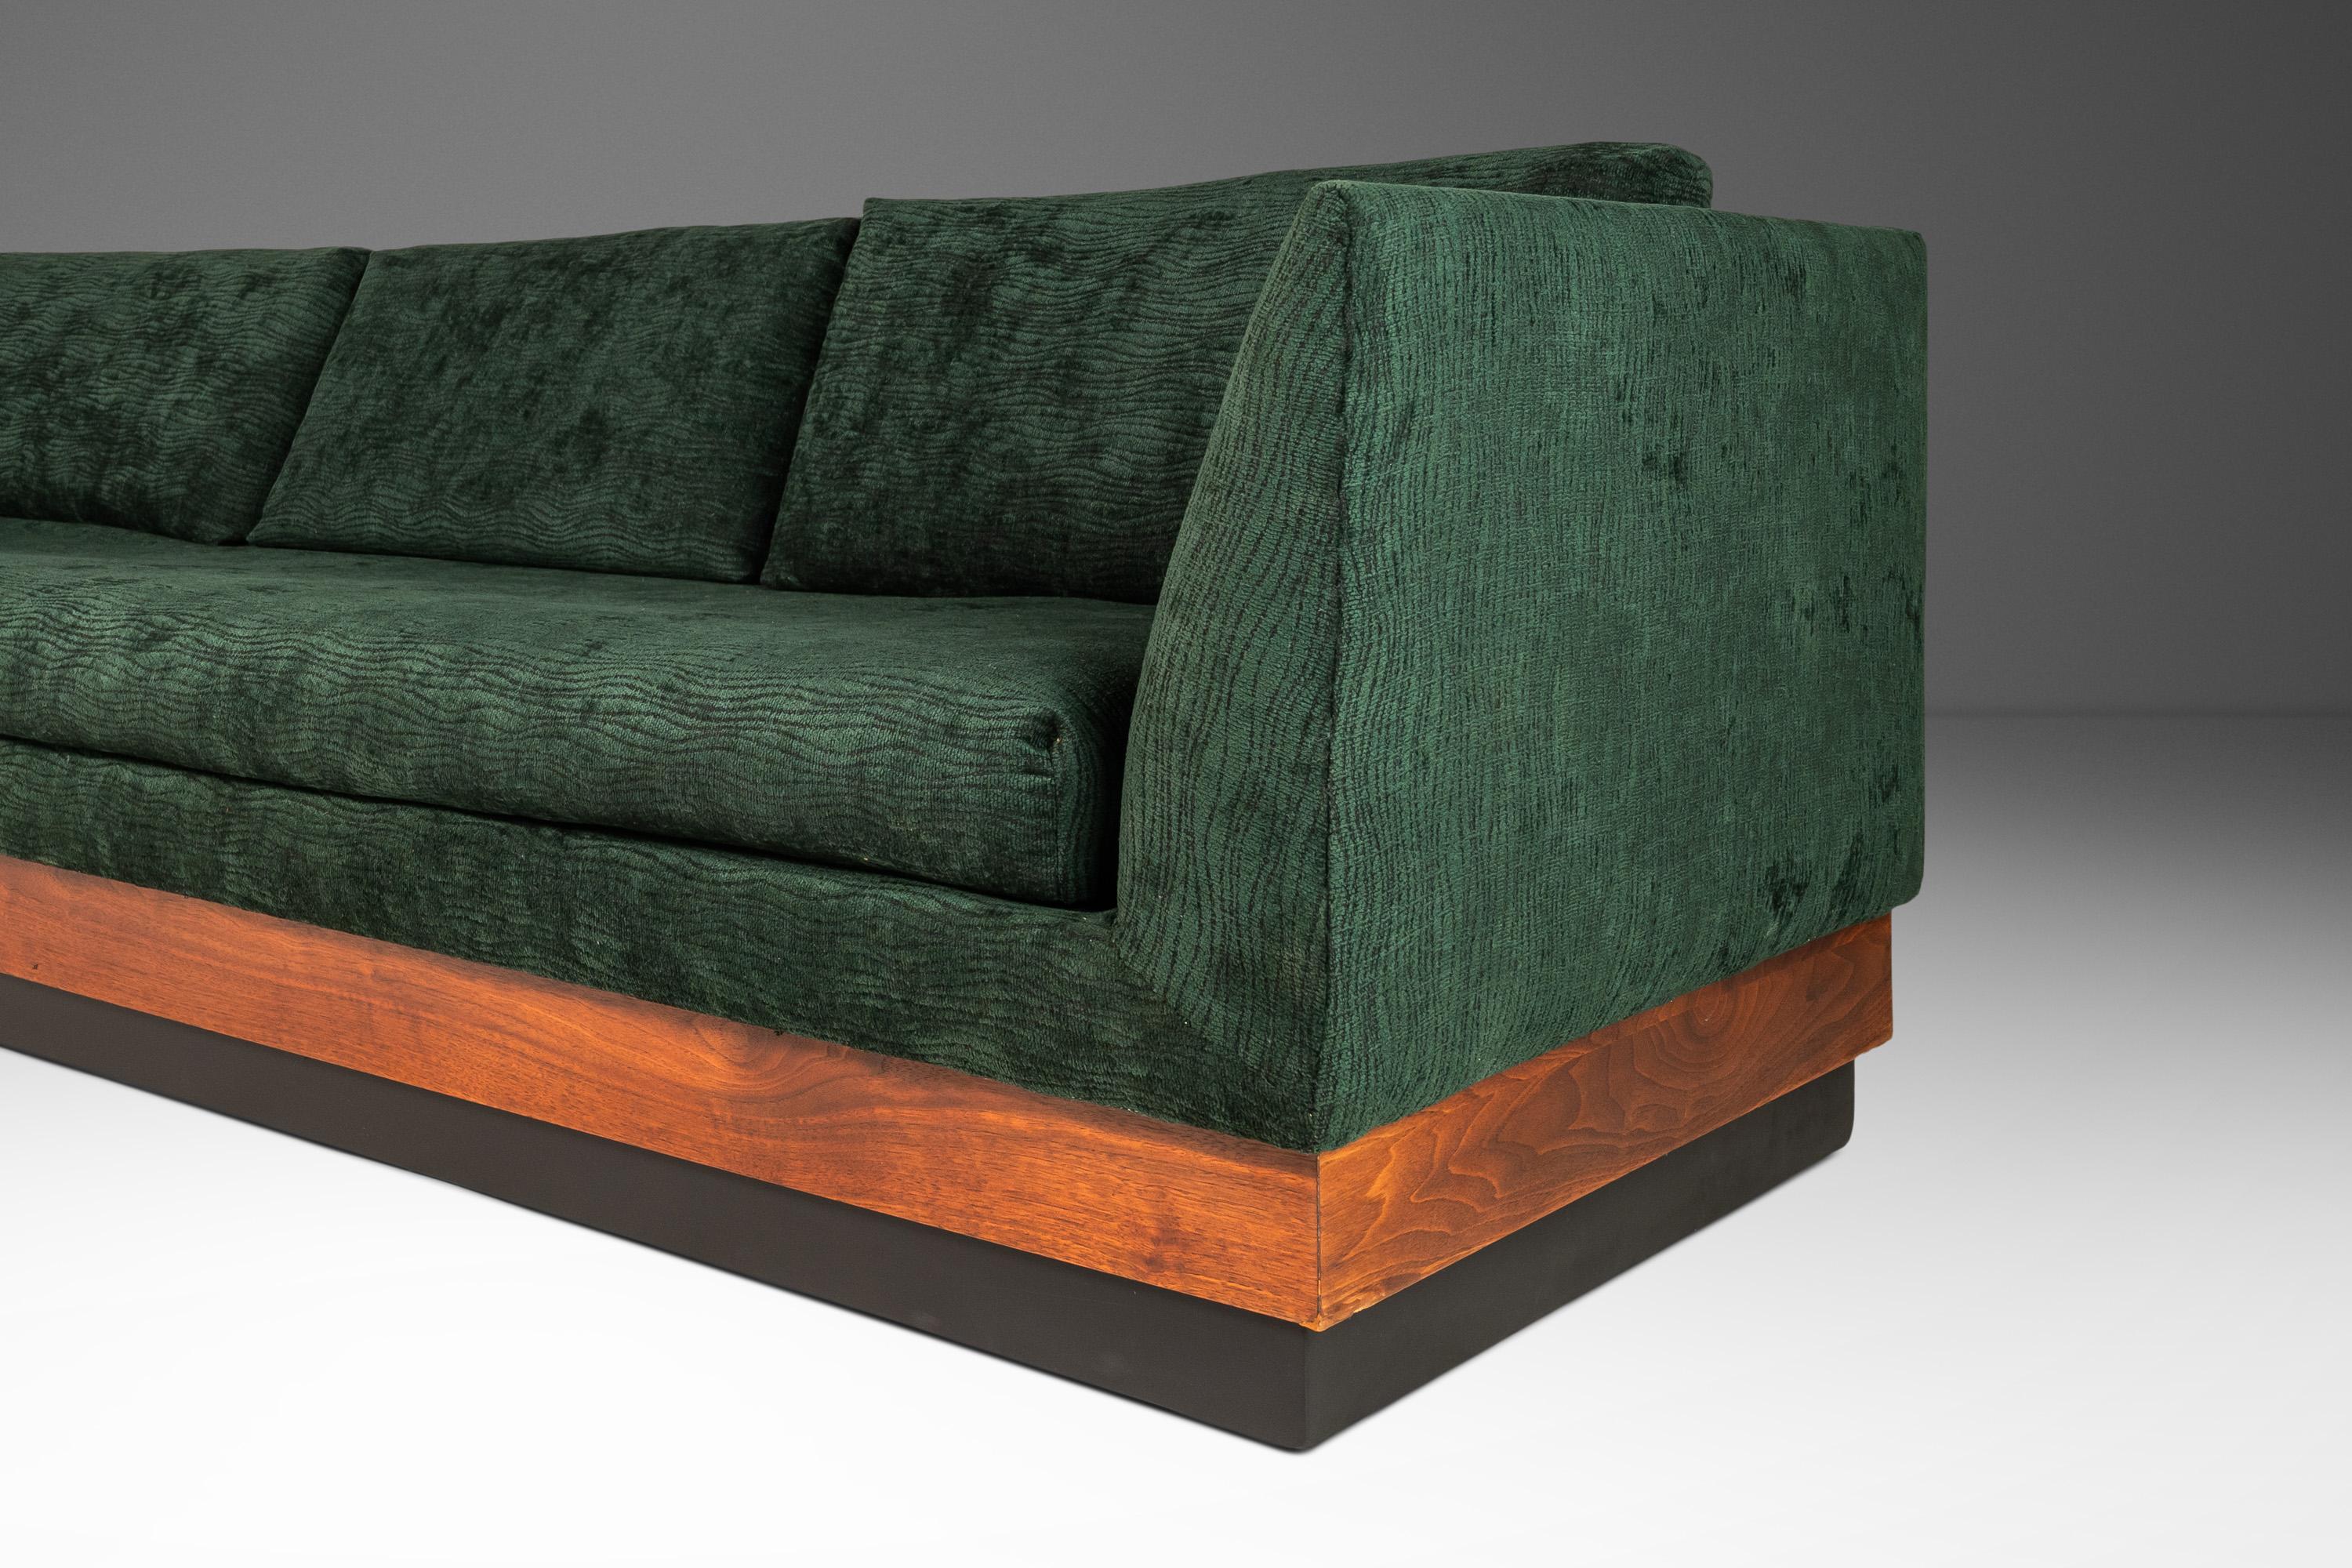 MCM Platform Sofa in Walnut by Adrian Pearsall for Craft Associates, c. 1960's For Sale 10